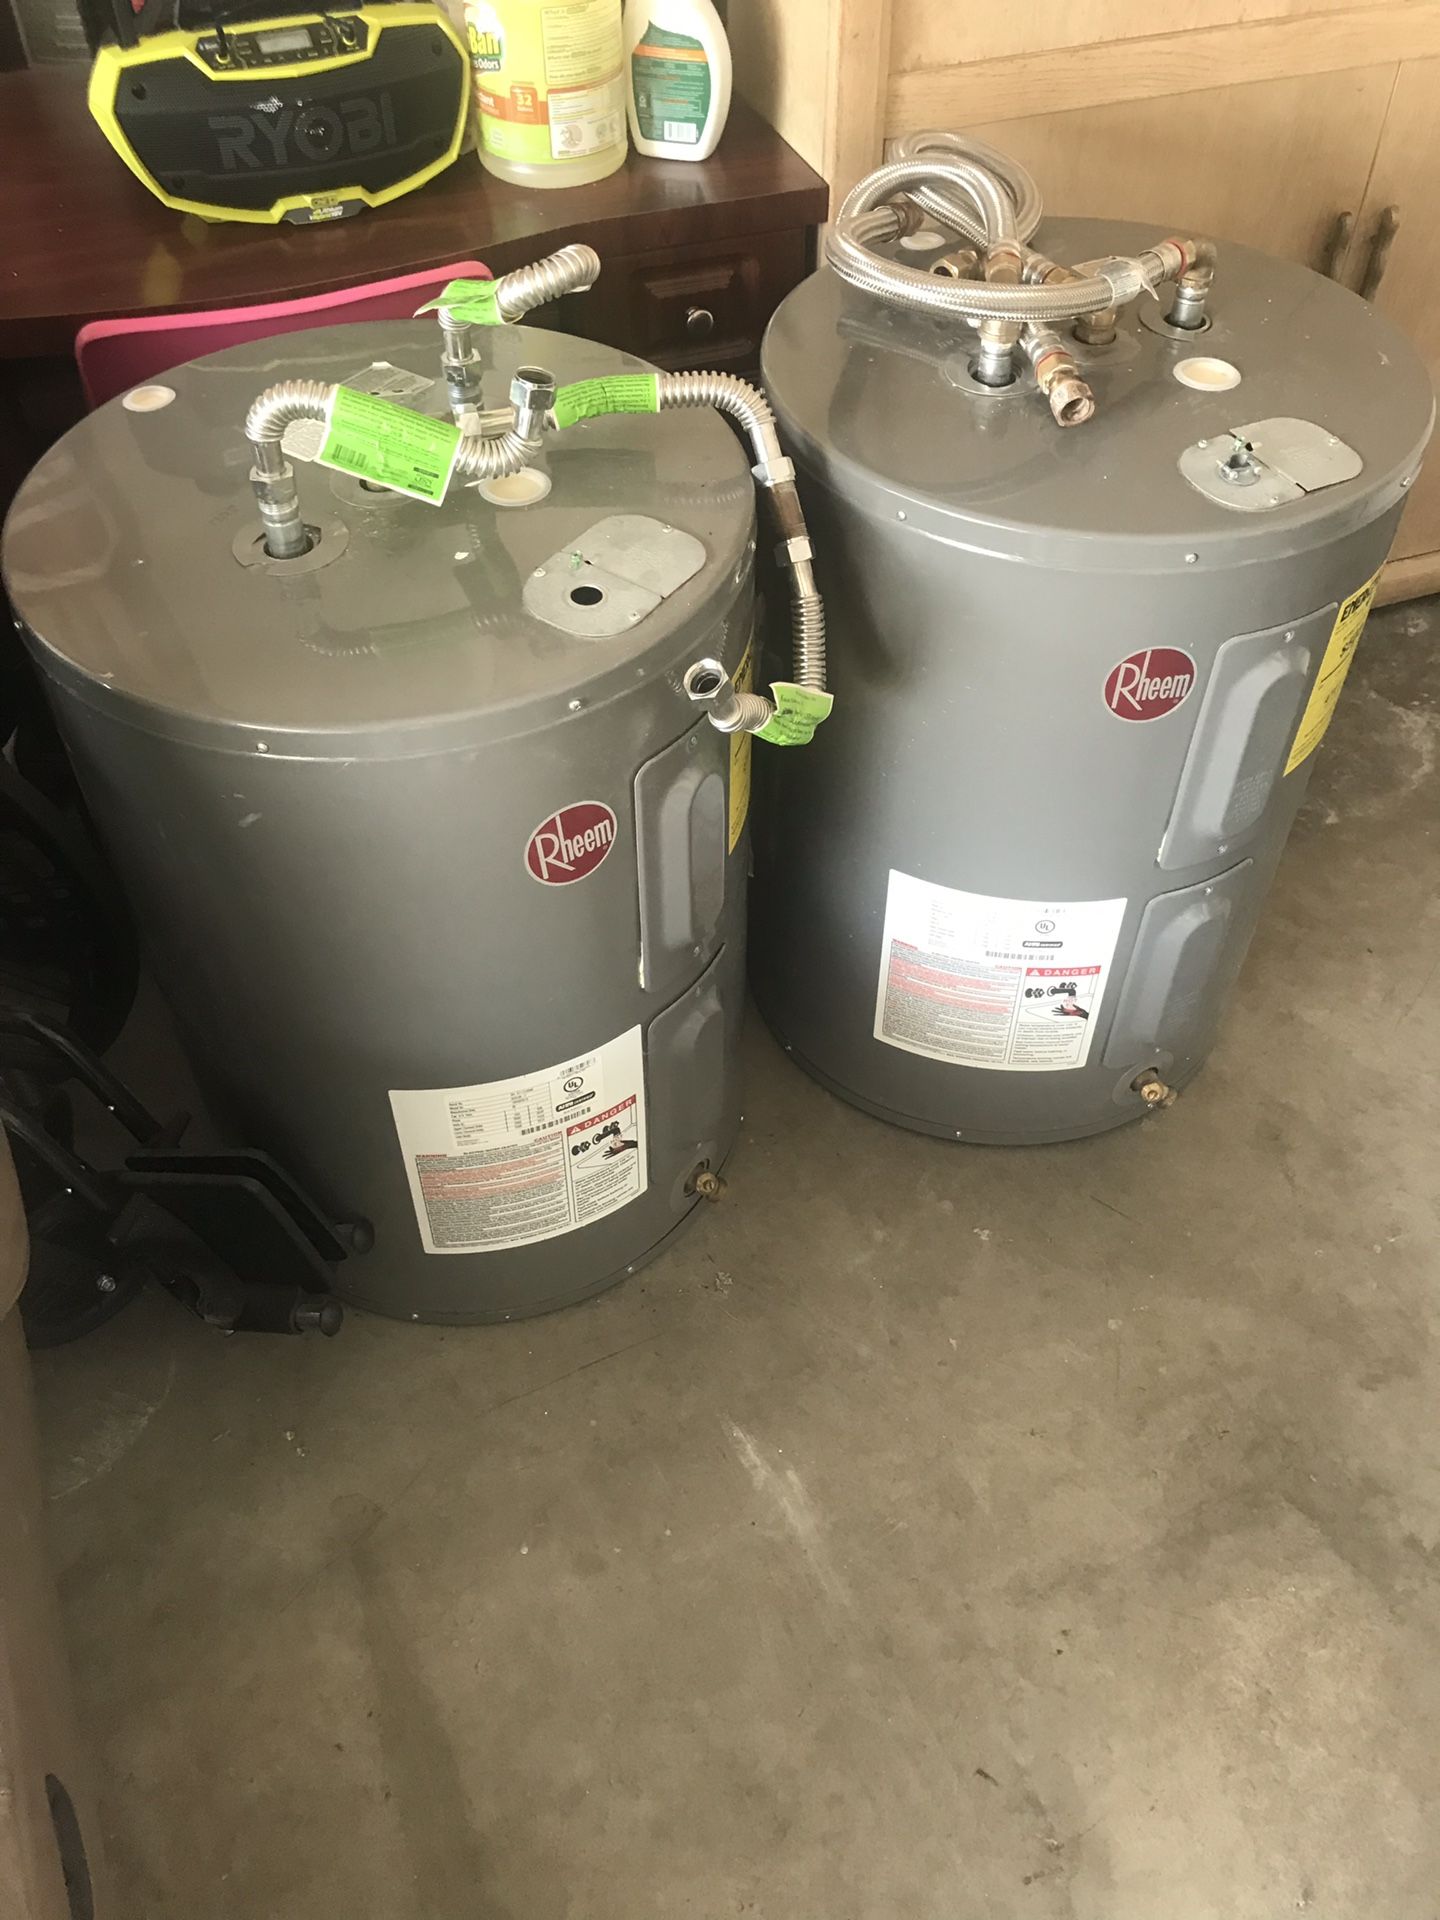 Rheem 30 Gallon Water Heater with hoses